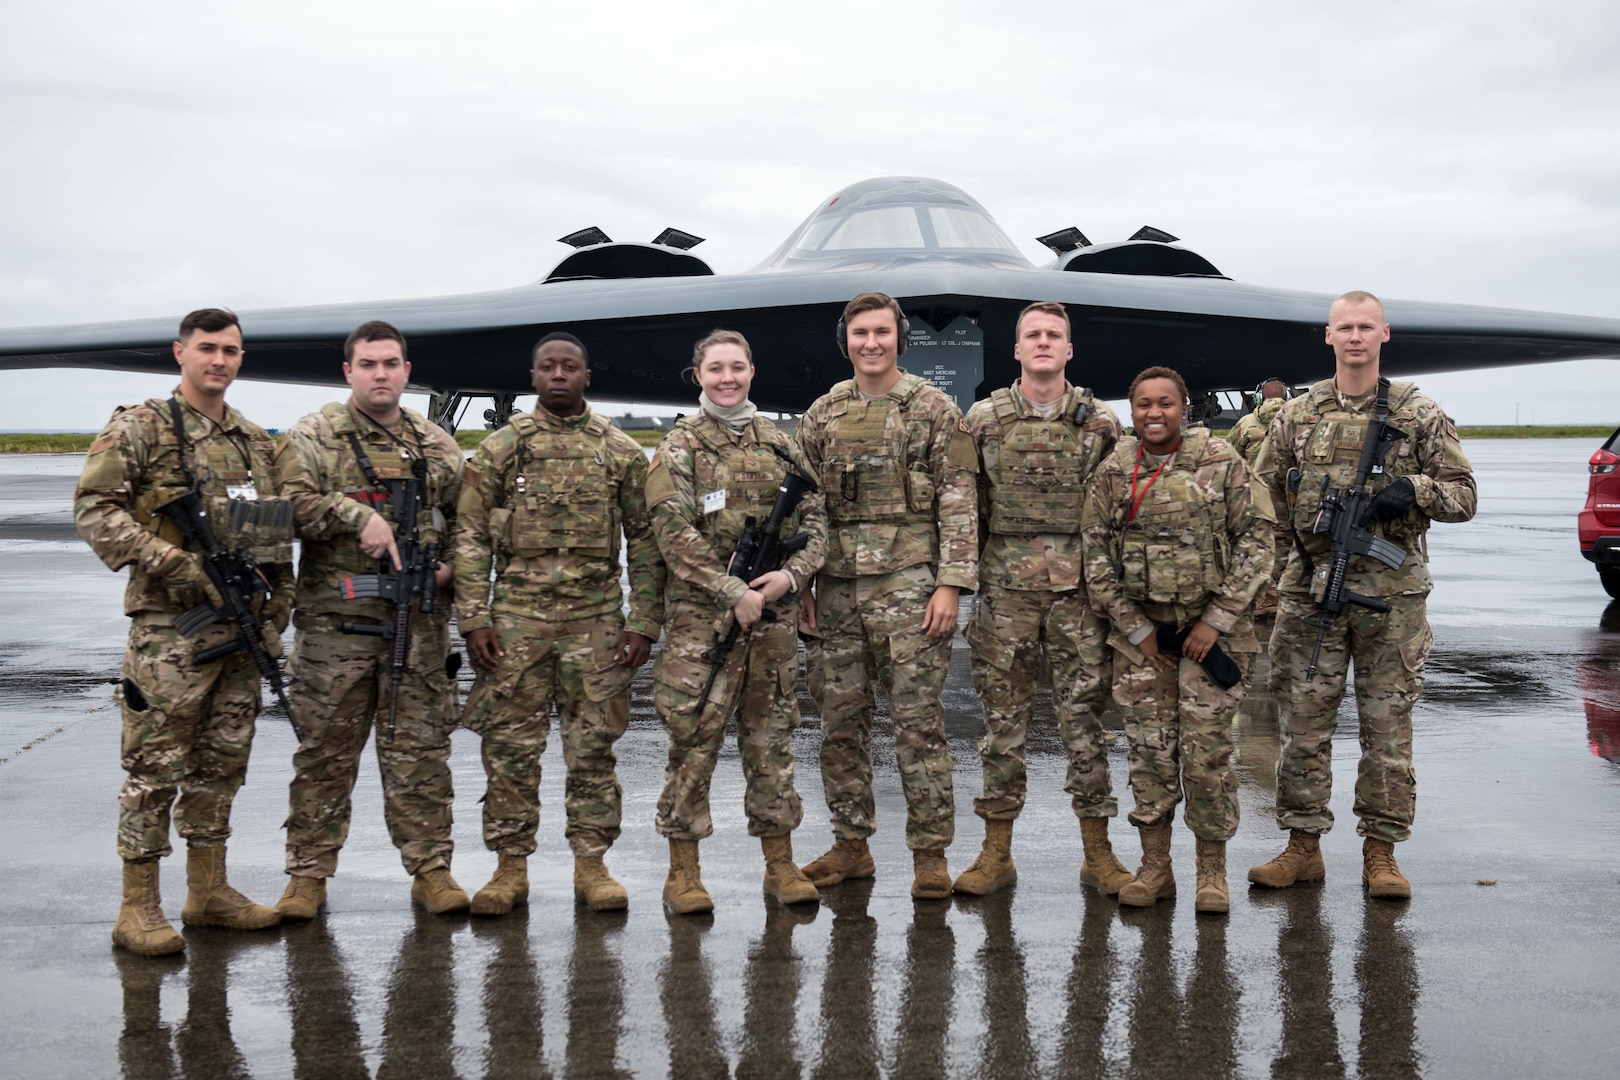 Security Forces Airmen from Whiteman Air Force Base, Missouri, pose in front of a B-2 Spirit Bomber at Naval Air Station Keflavik, Iceland, August 28, 2019, during a hot-pit refueling. Hot-pit refueling is a method of refueling an aircraft without shutting down the engines. This is the B-2s first time landing in Iceland. Forward locations like Iceland enhance the collective defense capabilities of both the U.S. and NATO allies.